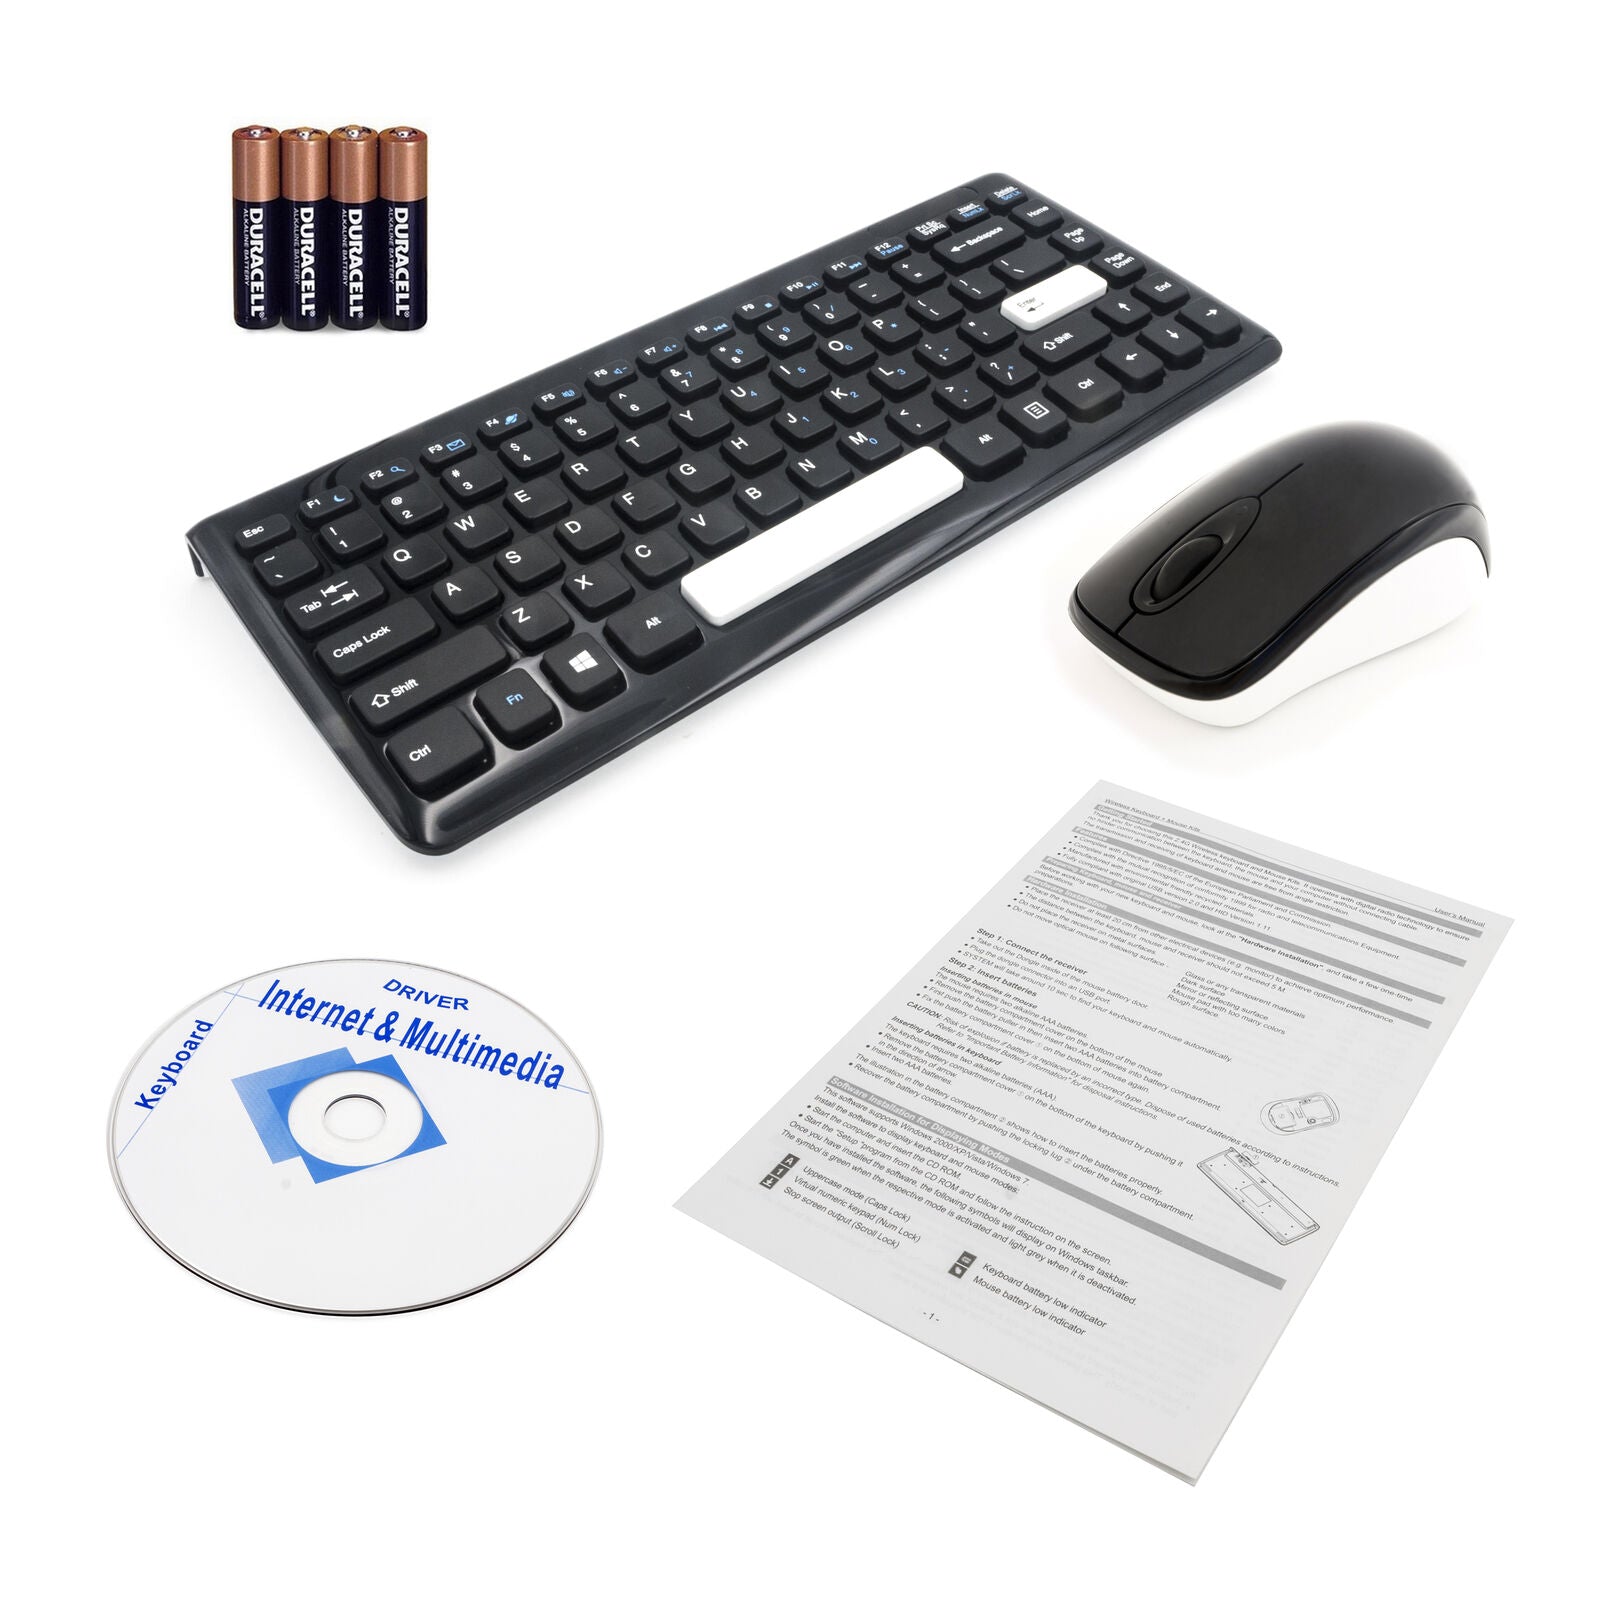 Wireless Slim Keyboard and Mouse Kits 2.4Ghz Silm and Light Noise Black KG-0977